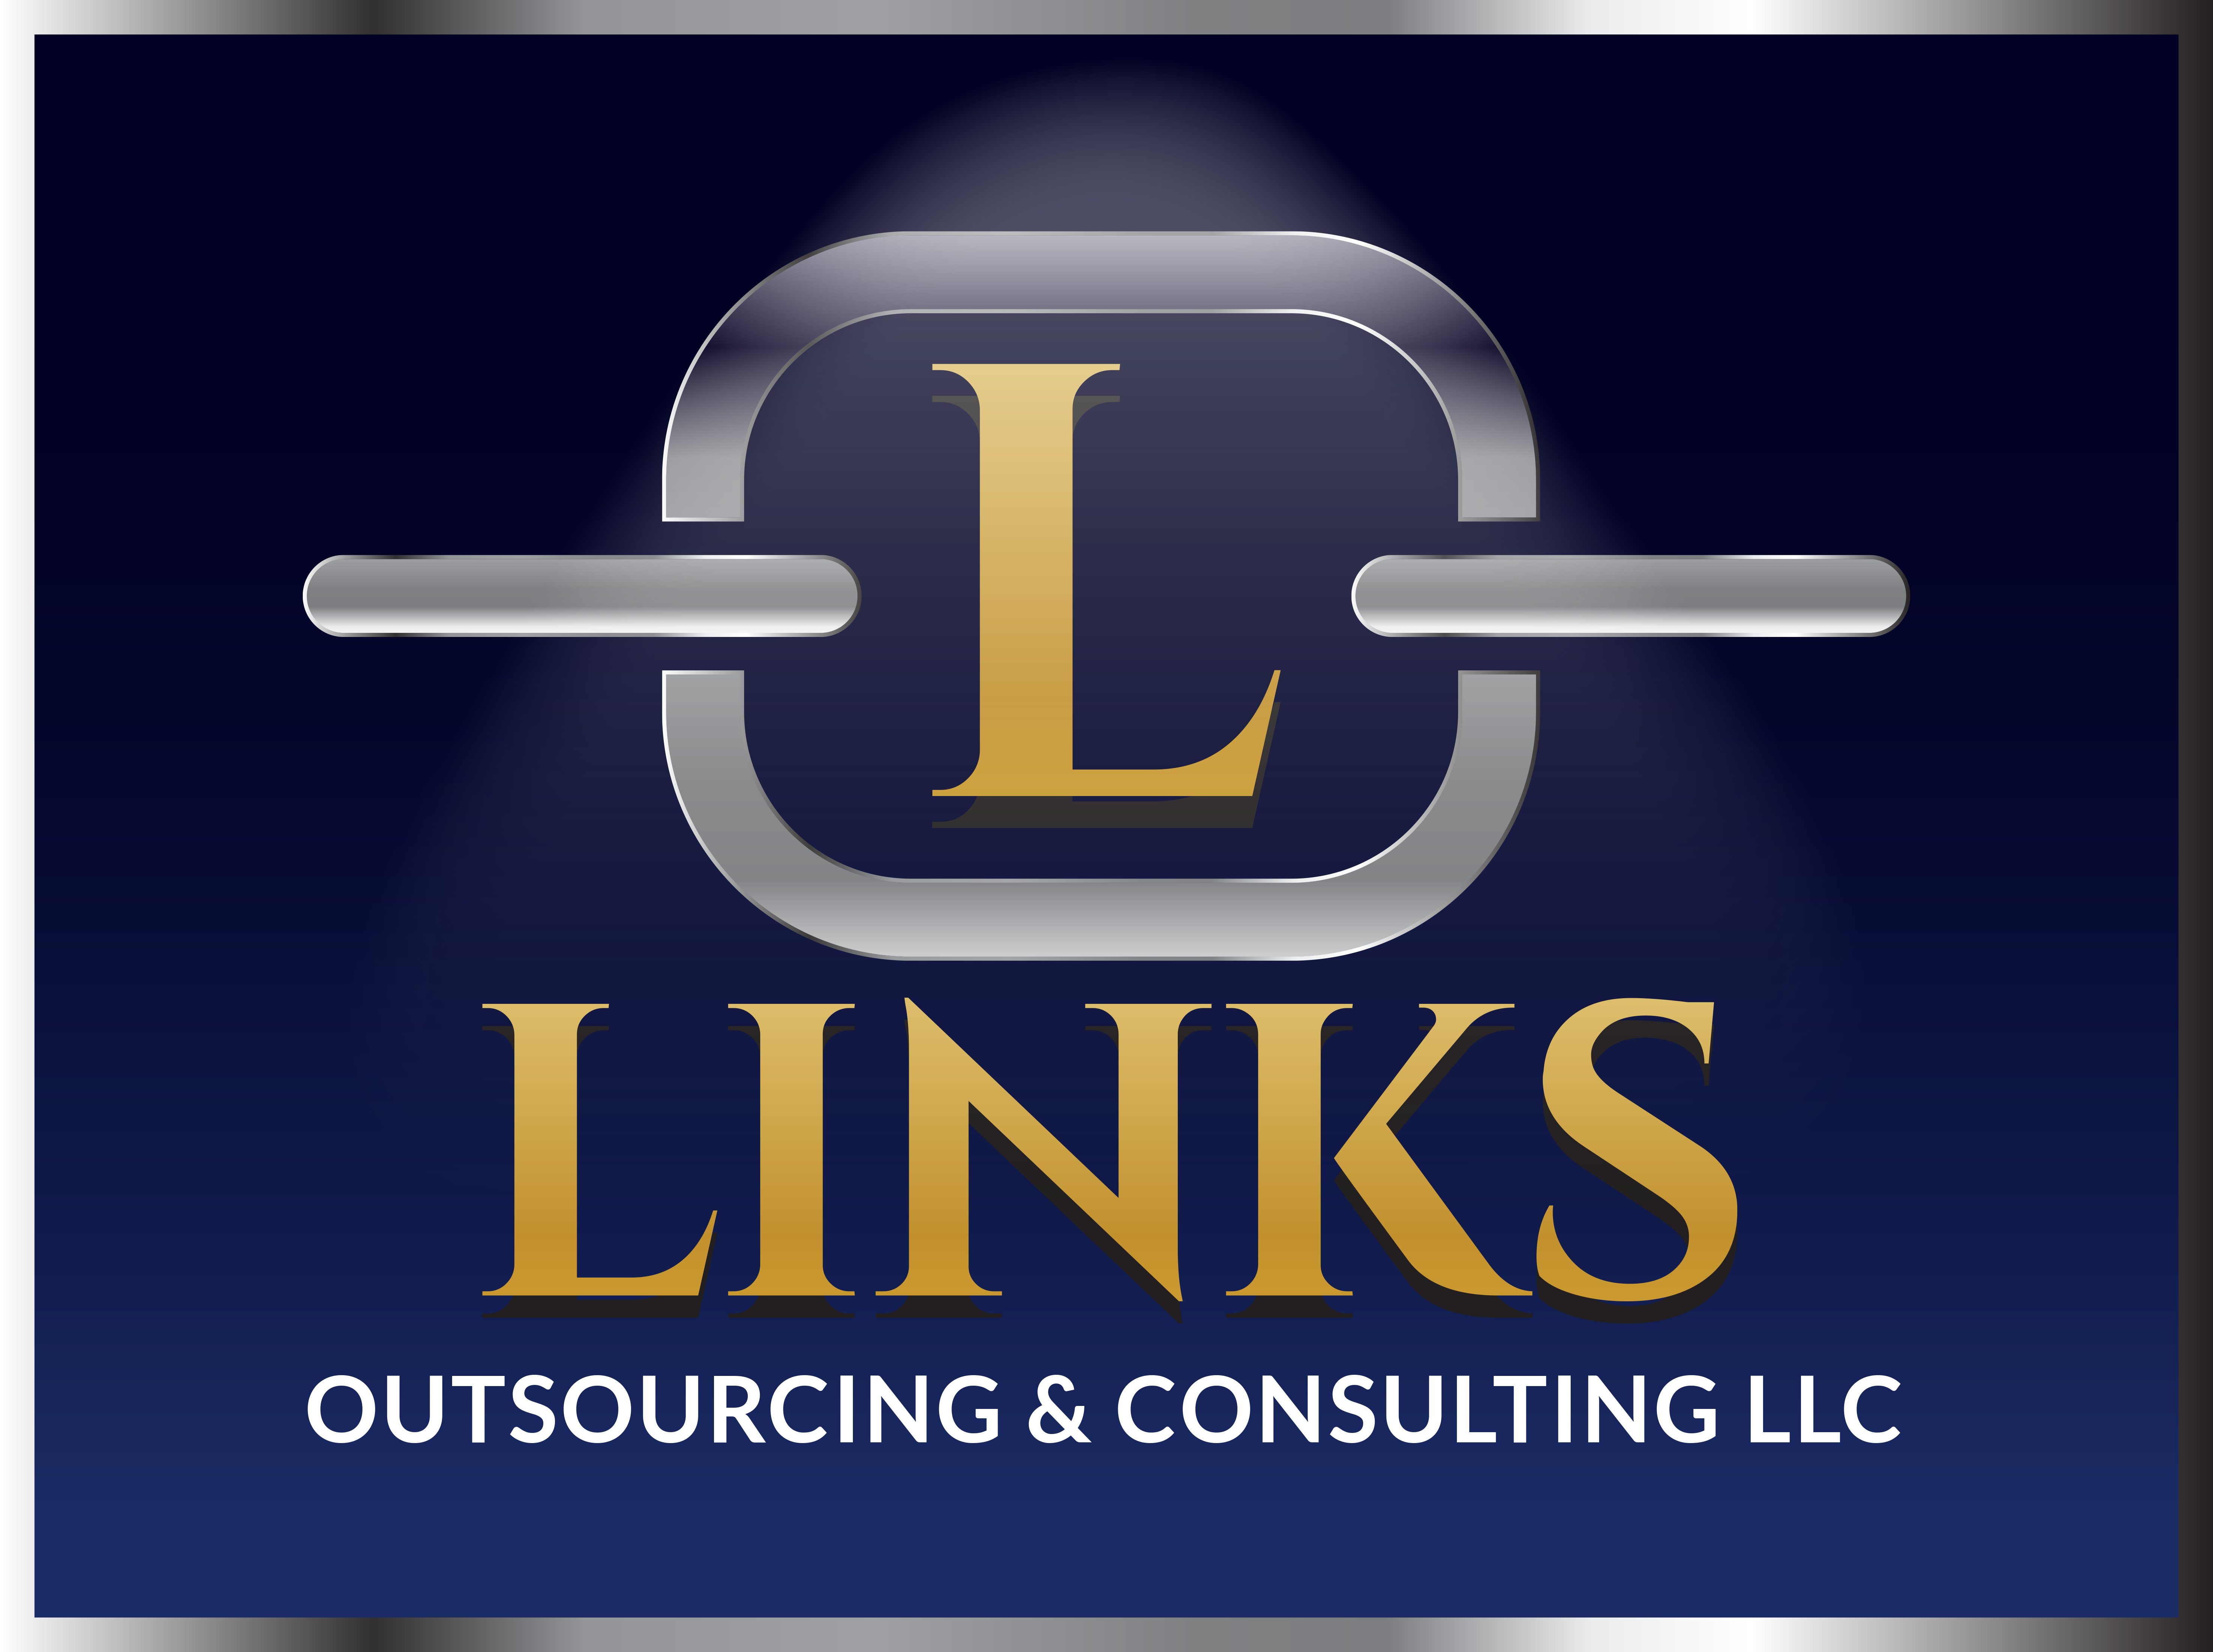 A blue and gold logo for links outsourcing & consulting llc.